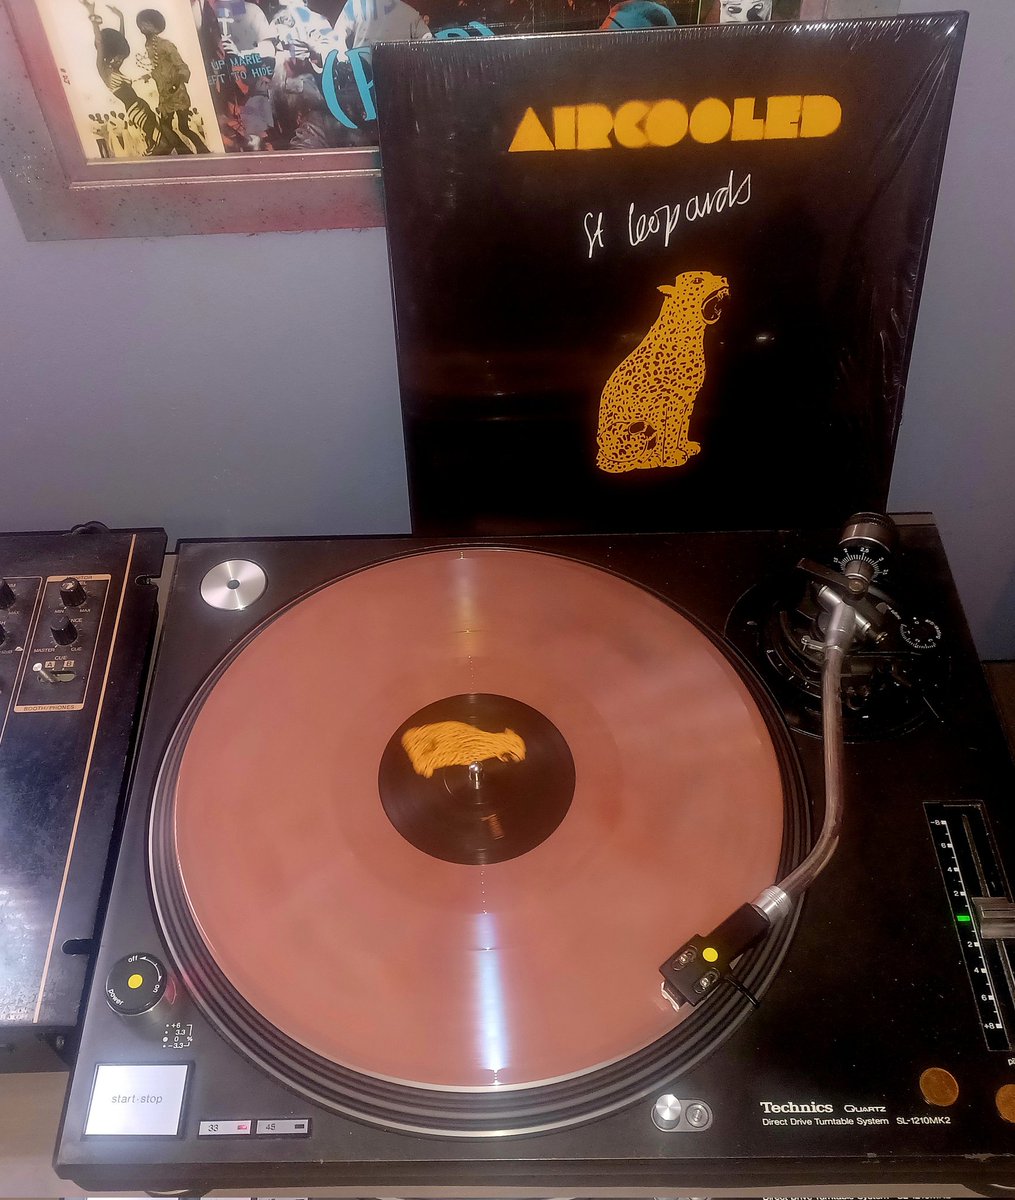 Finally got to see Aircooled last week at the third time of asking! Well ace! #indie #vinylrecords